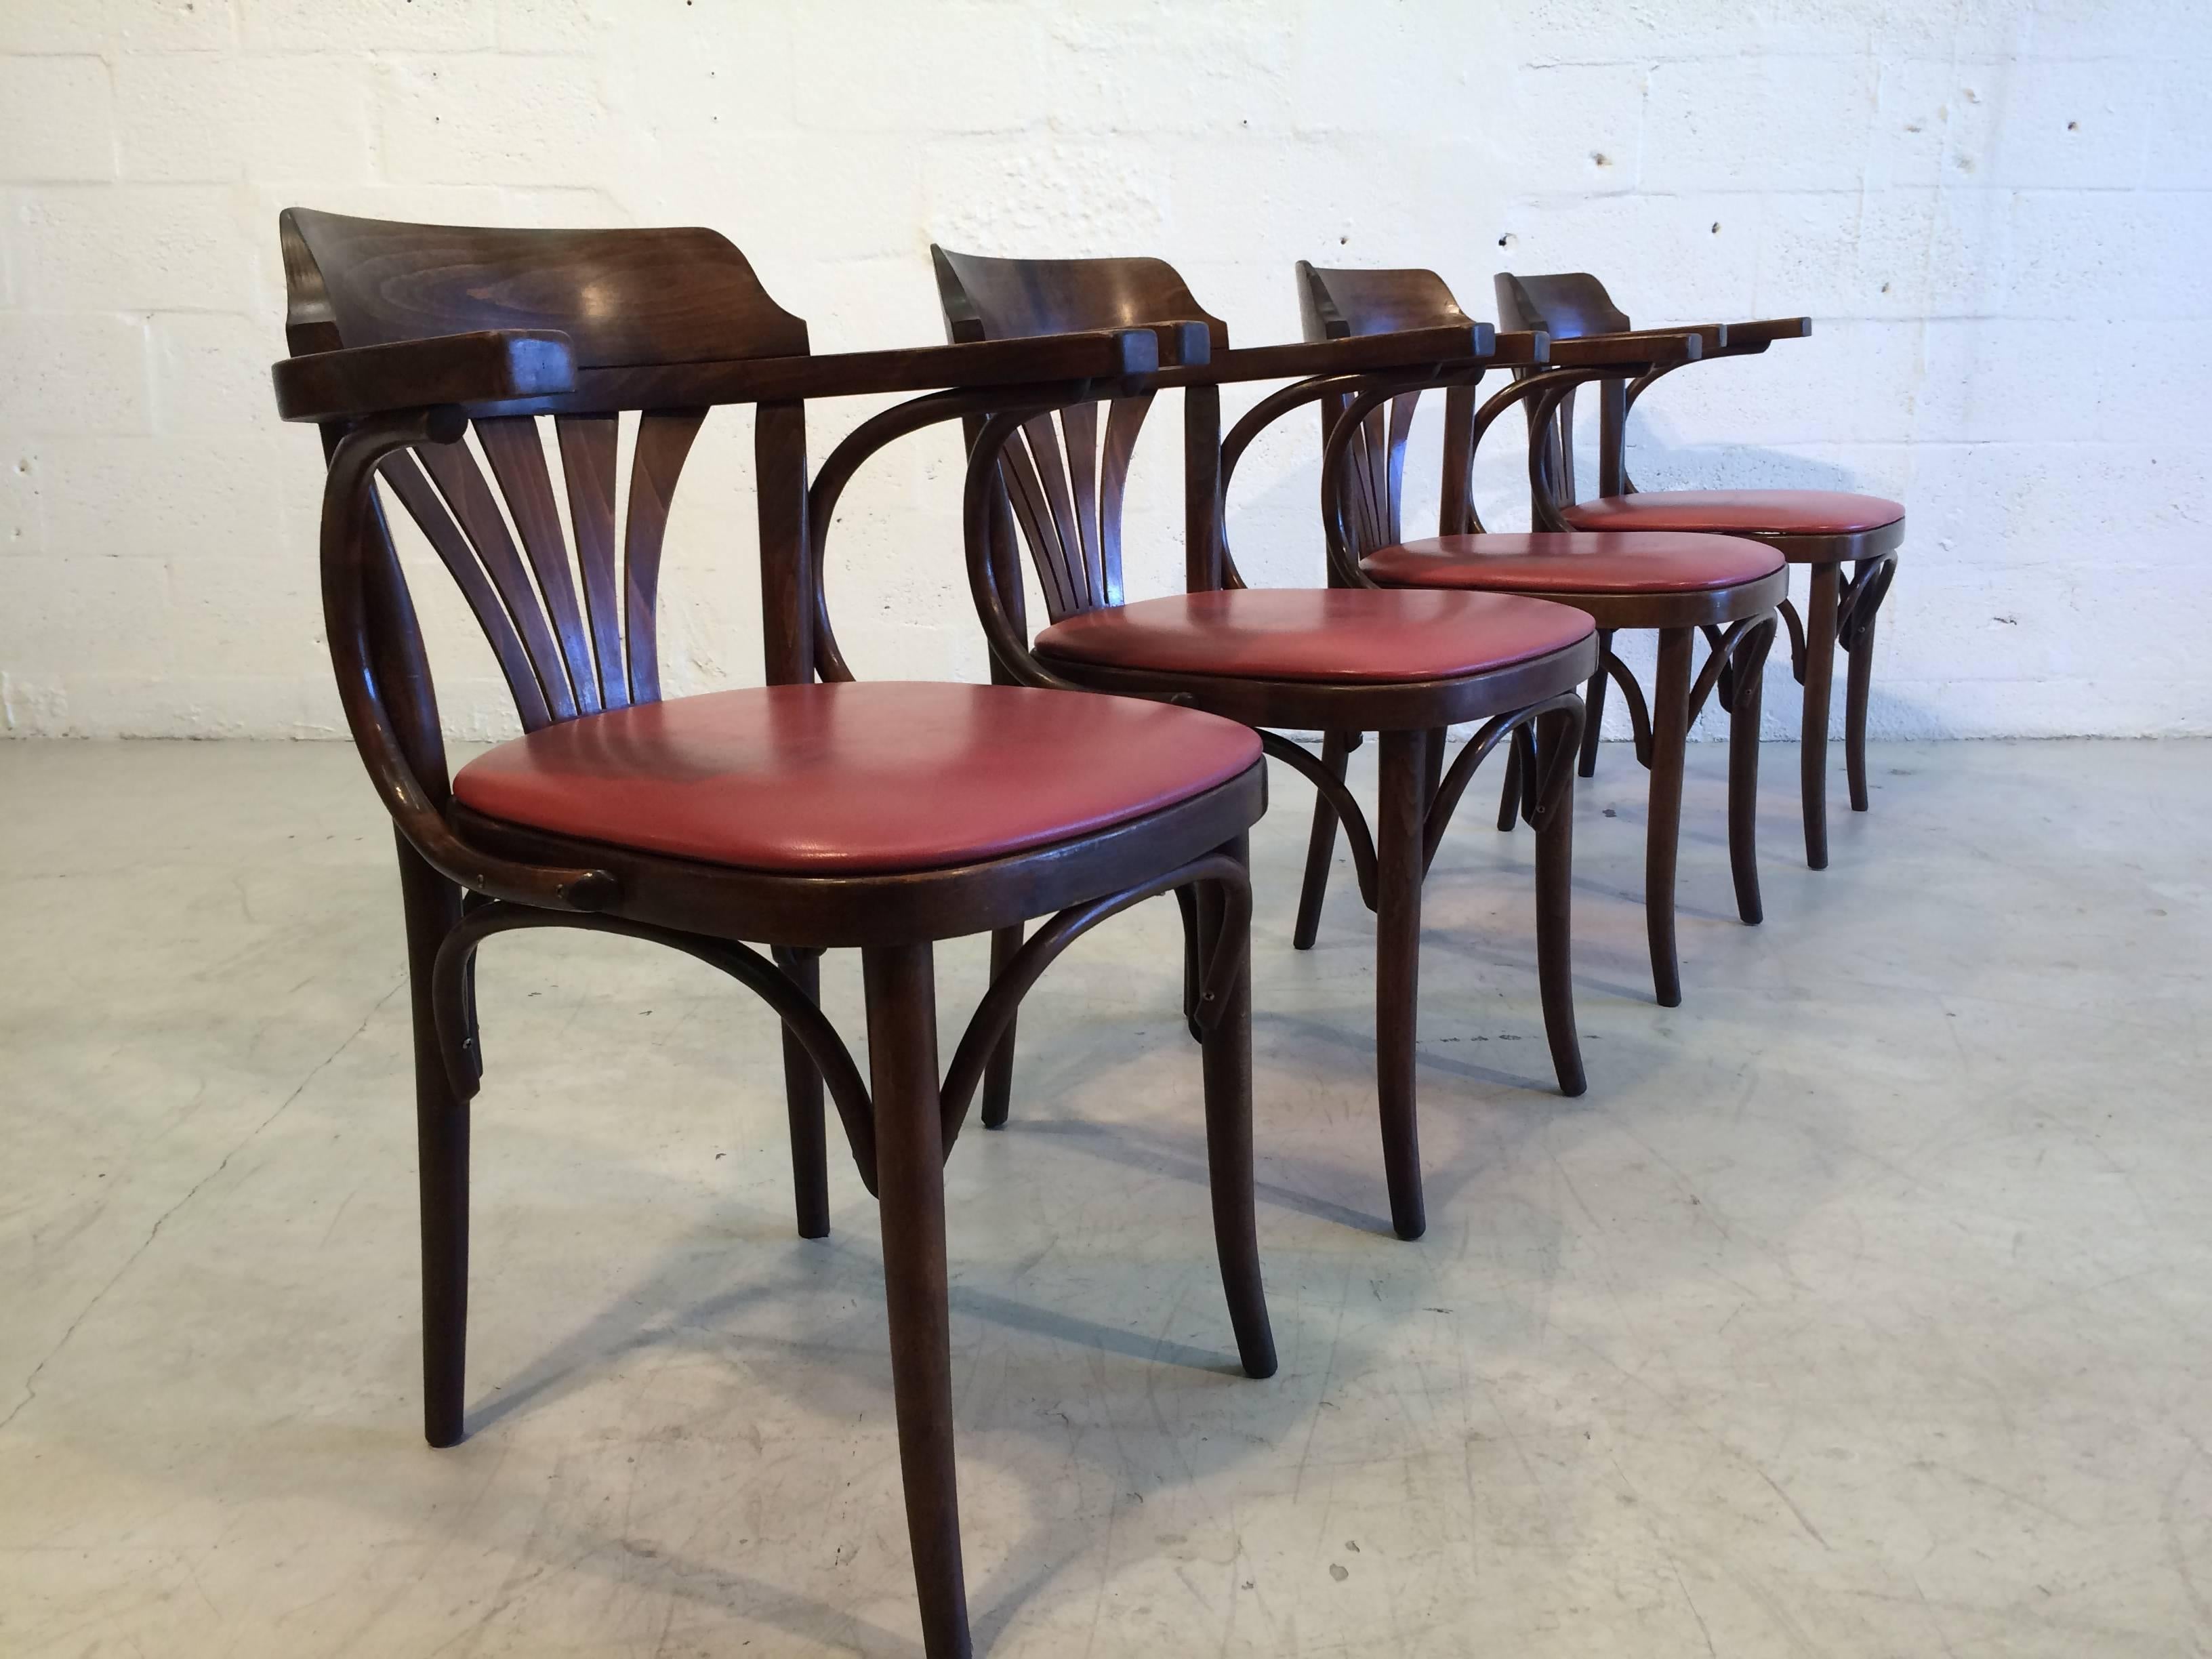 Mid-20th Century Six Bentwood Chairs by Drevounia, Czech Republic, 1950s, 12 Chairs Available